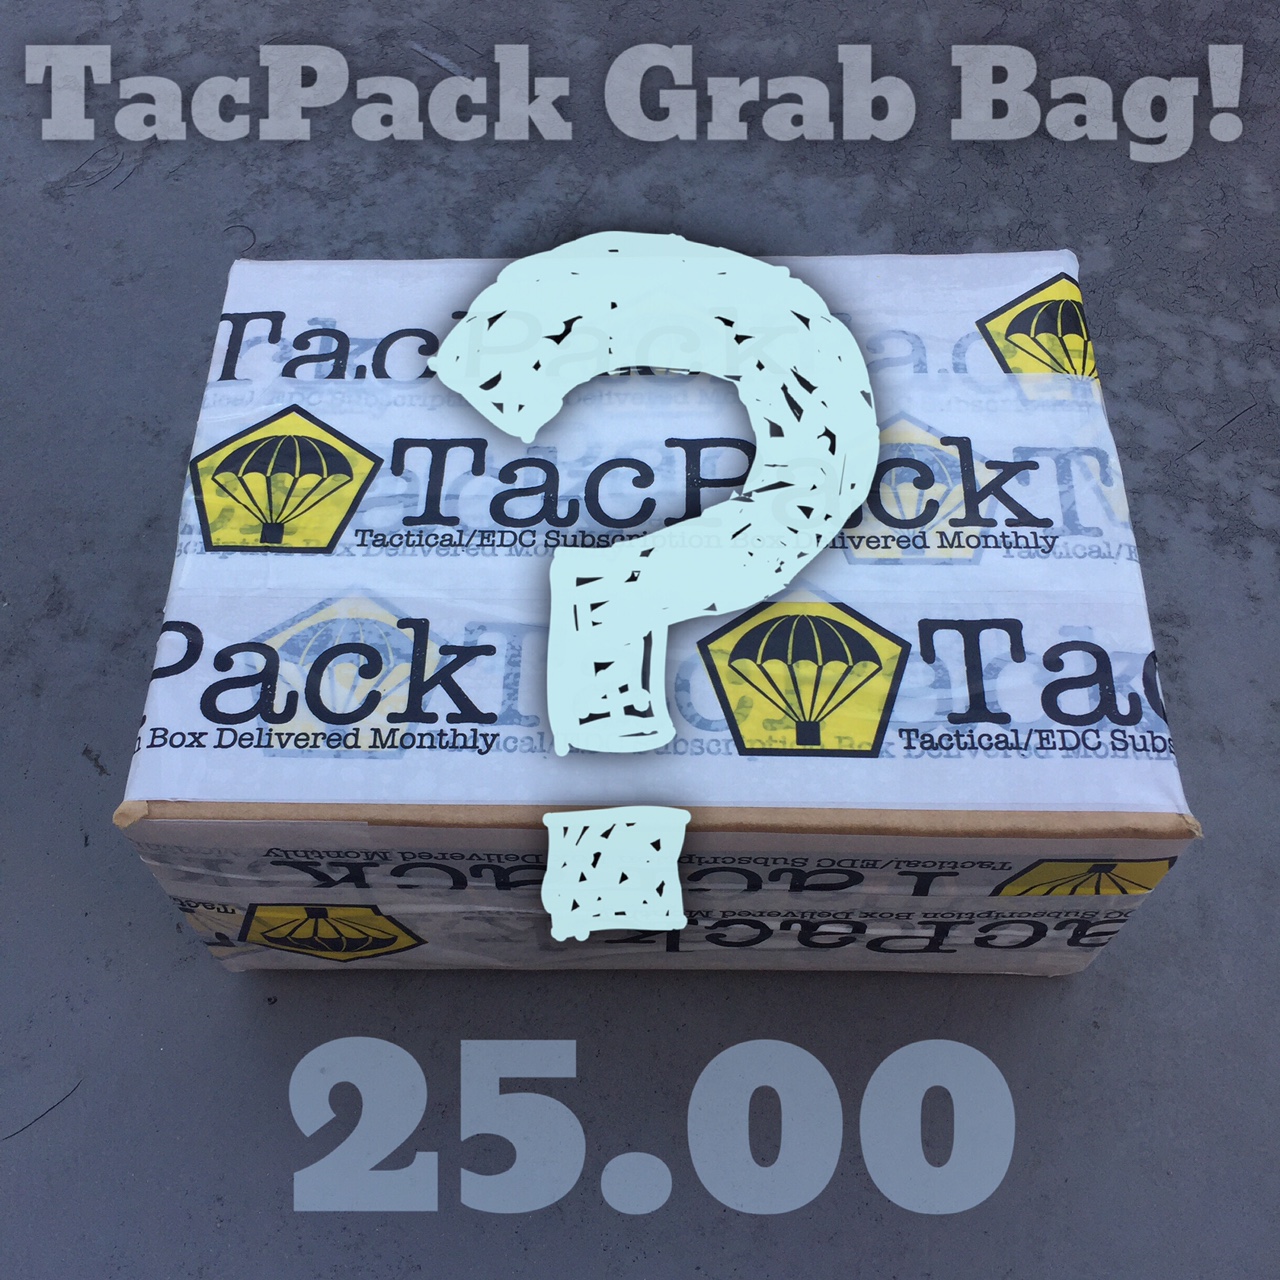 tacpack with crack